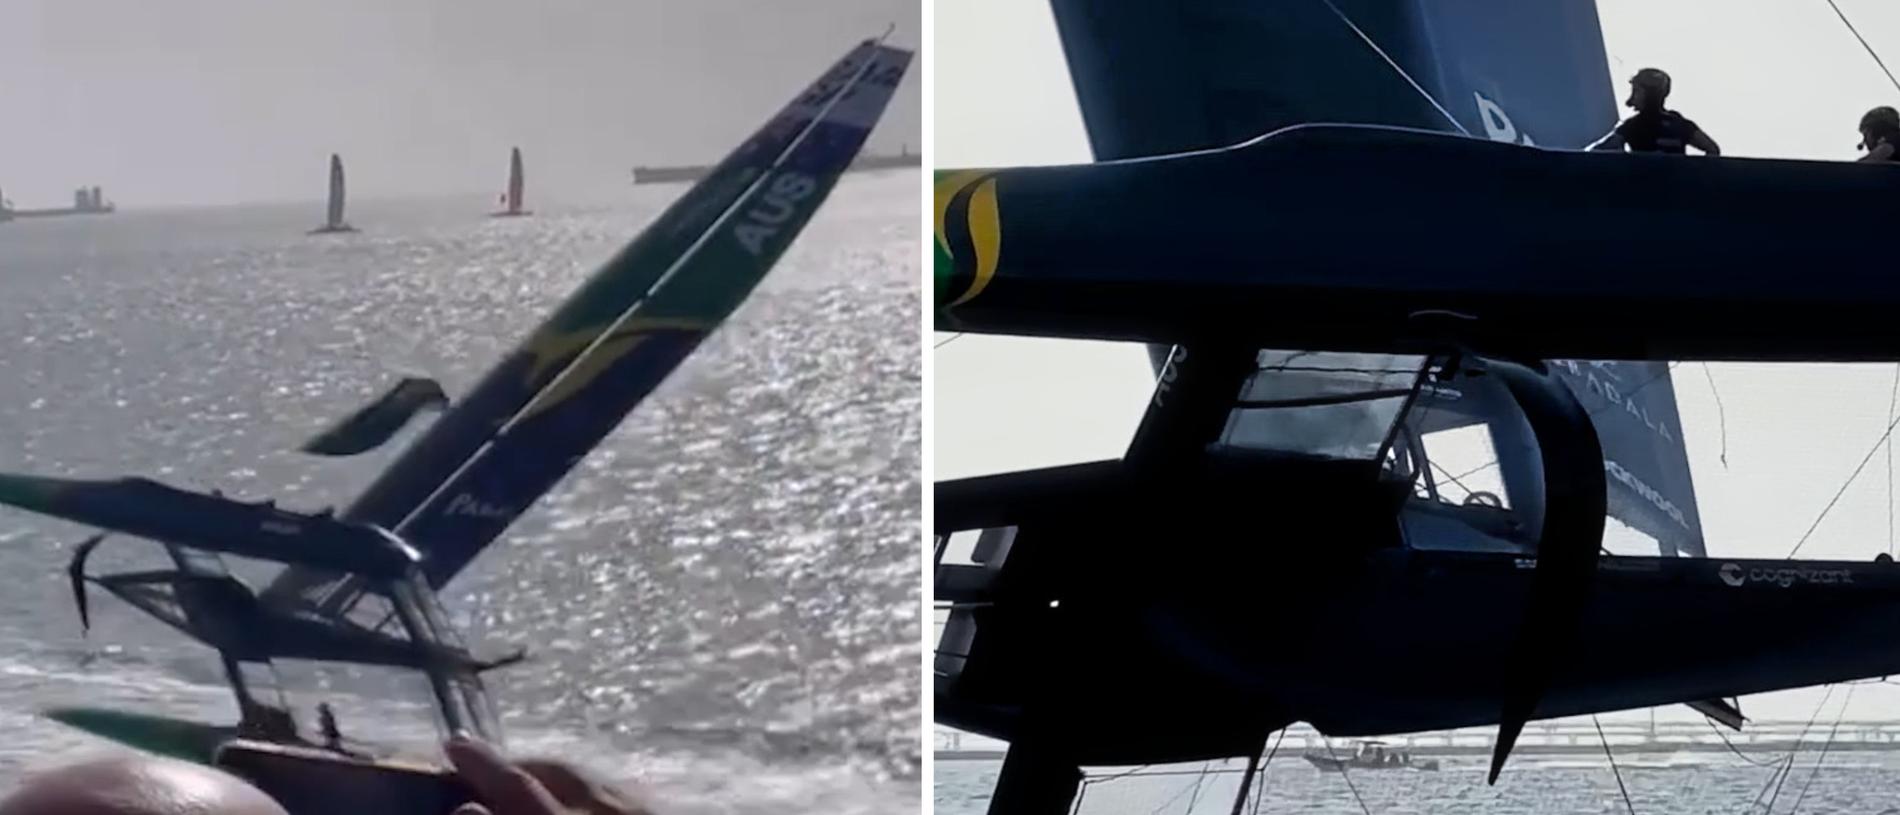 The Flying Roo came close to disaster in a scary SailGP moment.